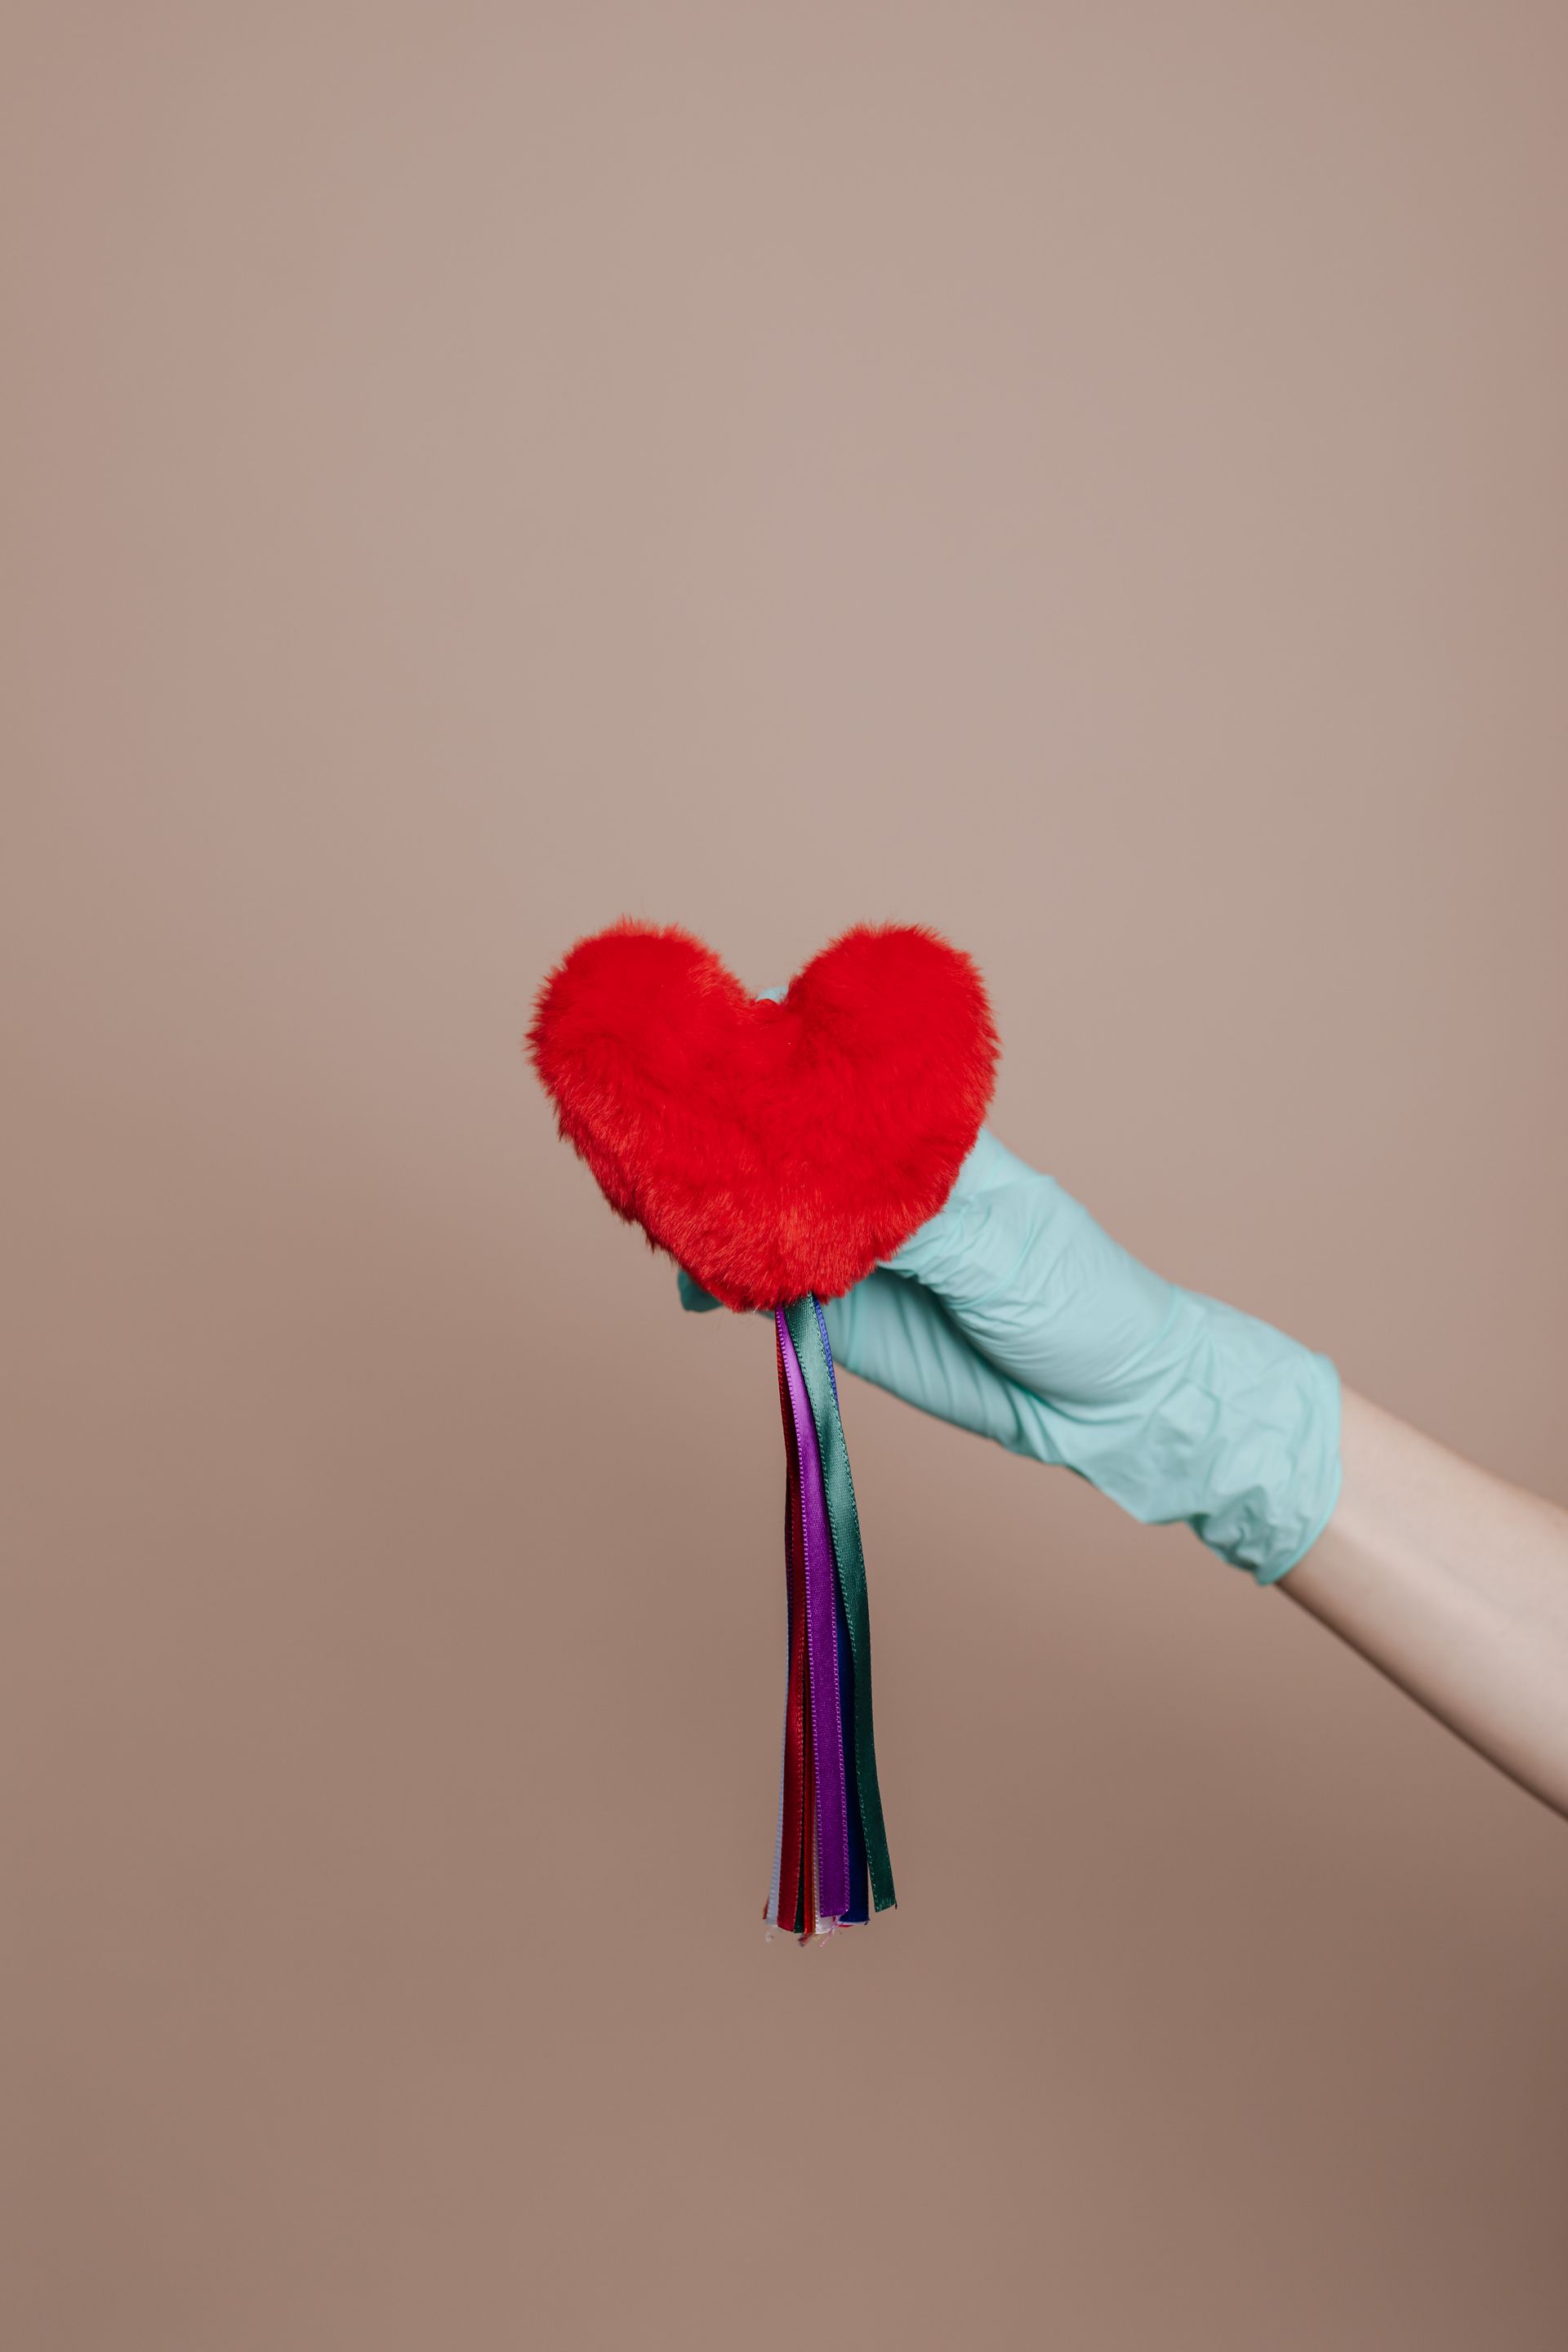 a person wearing a glove is holding a red heart with a tassel .